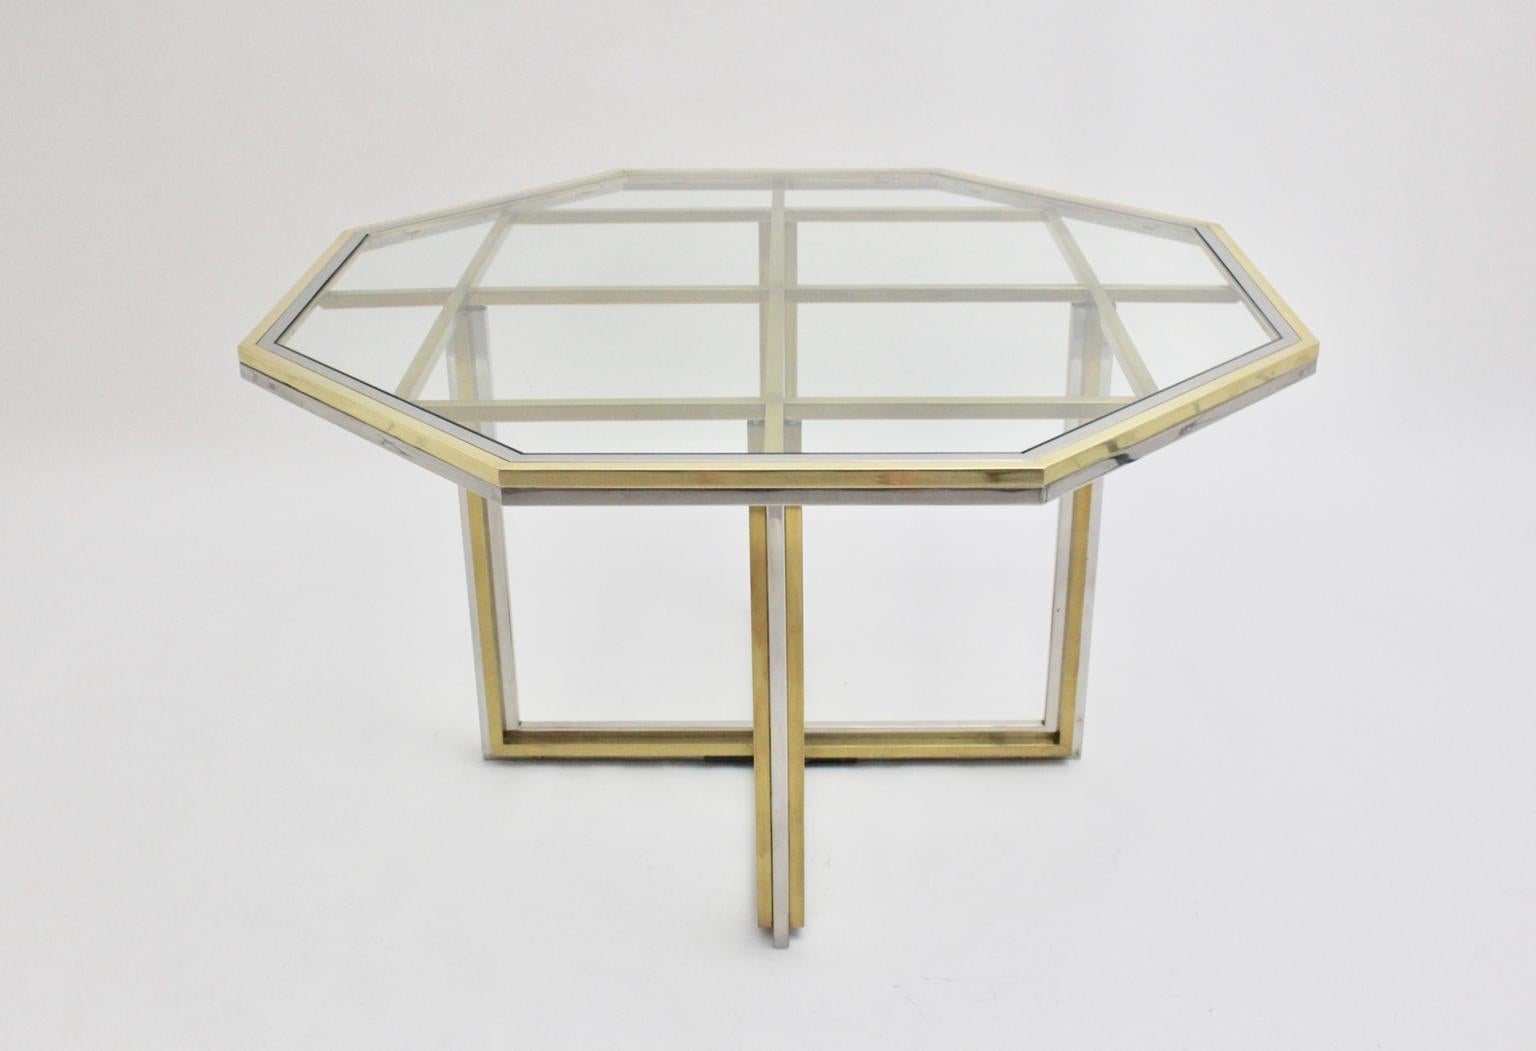 A Romeo Rega Style modernist brass and chromed vintage dining table or center table, 1970s, Italy.
The octagonal Mid-Century Modern vintage dining or center table in the style of Romeo Rega was made of brass and chromed metal and appears as an